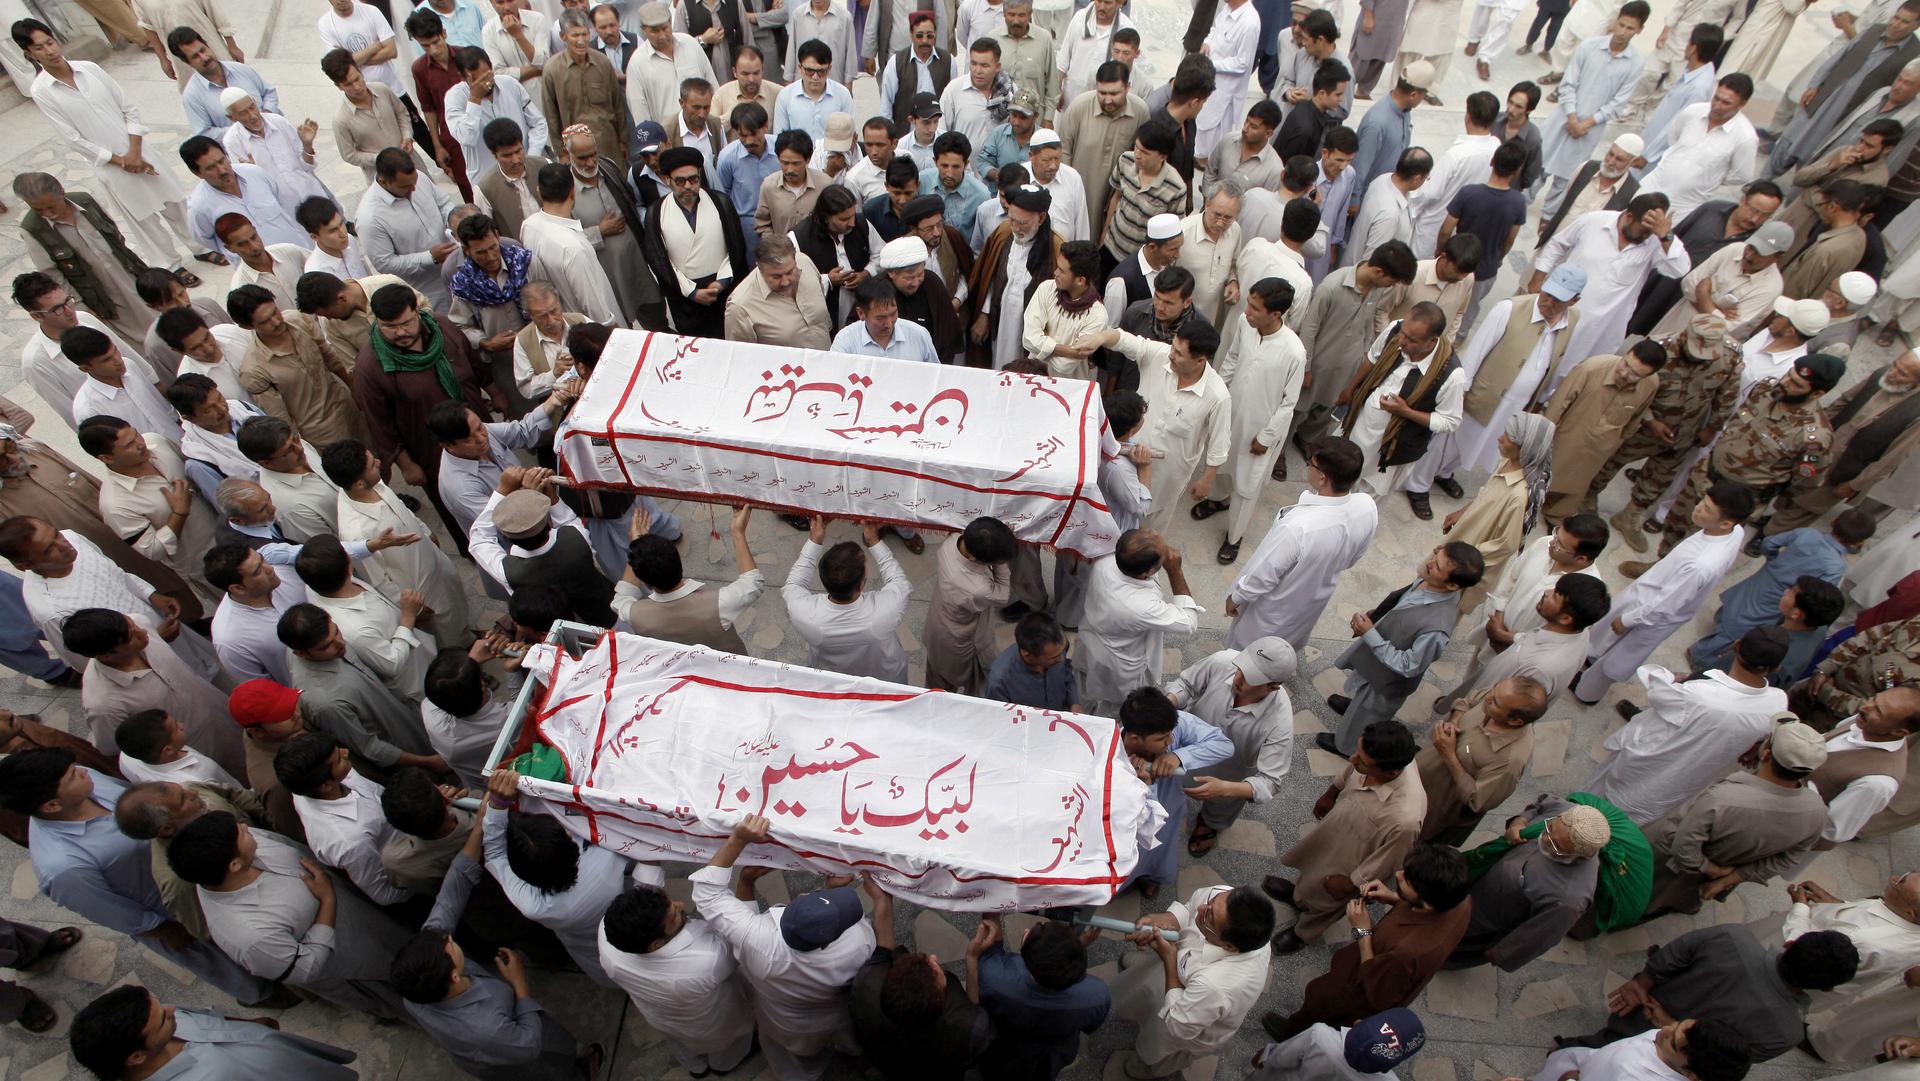 Hazara men carry the coffins of their relatives who were killed after gunmen opened fire on a car, during a funeral ceremony in Quetta, Pakistan, July 19, 2017.